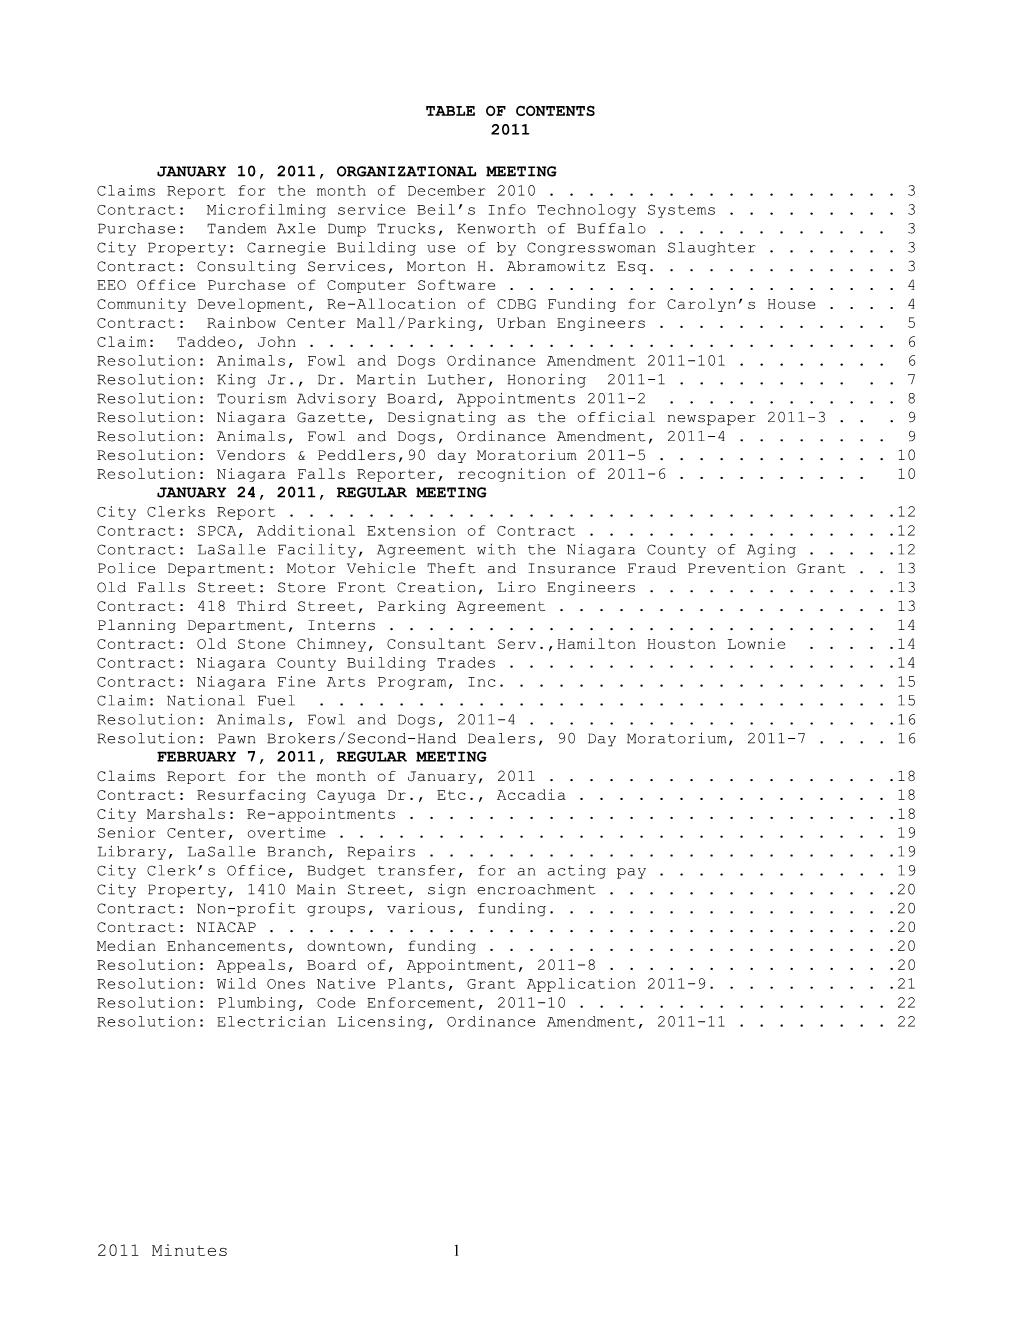 Table of Contents 2011